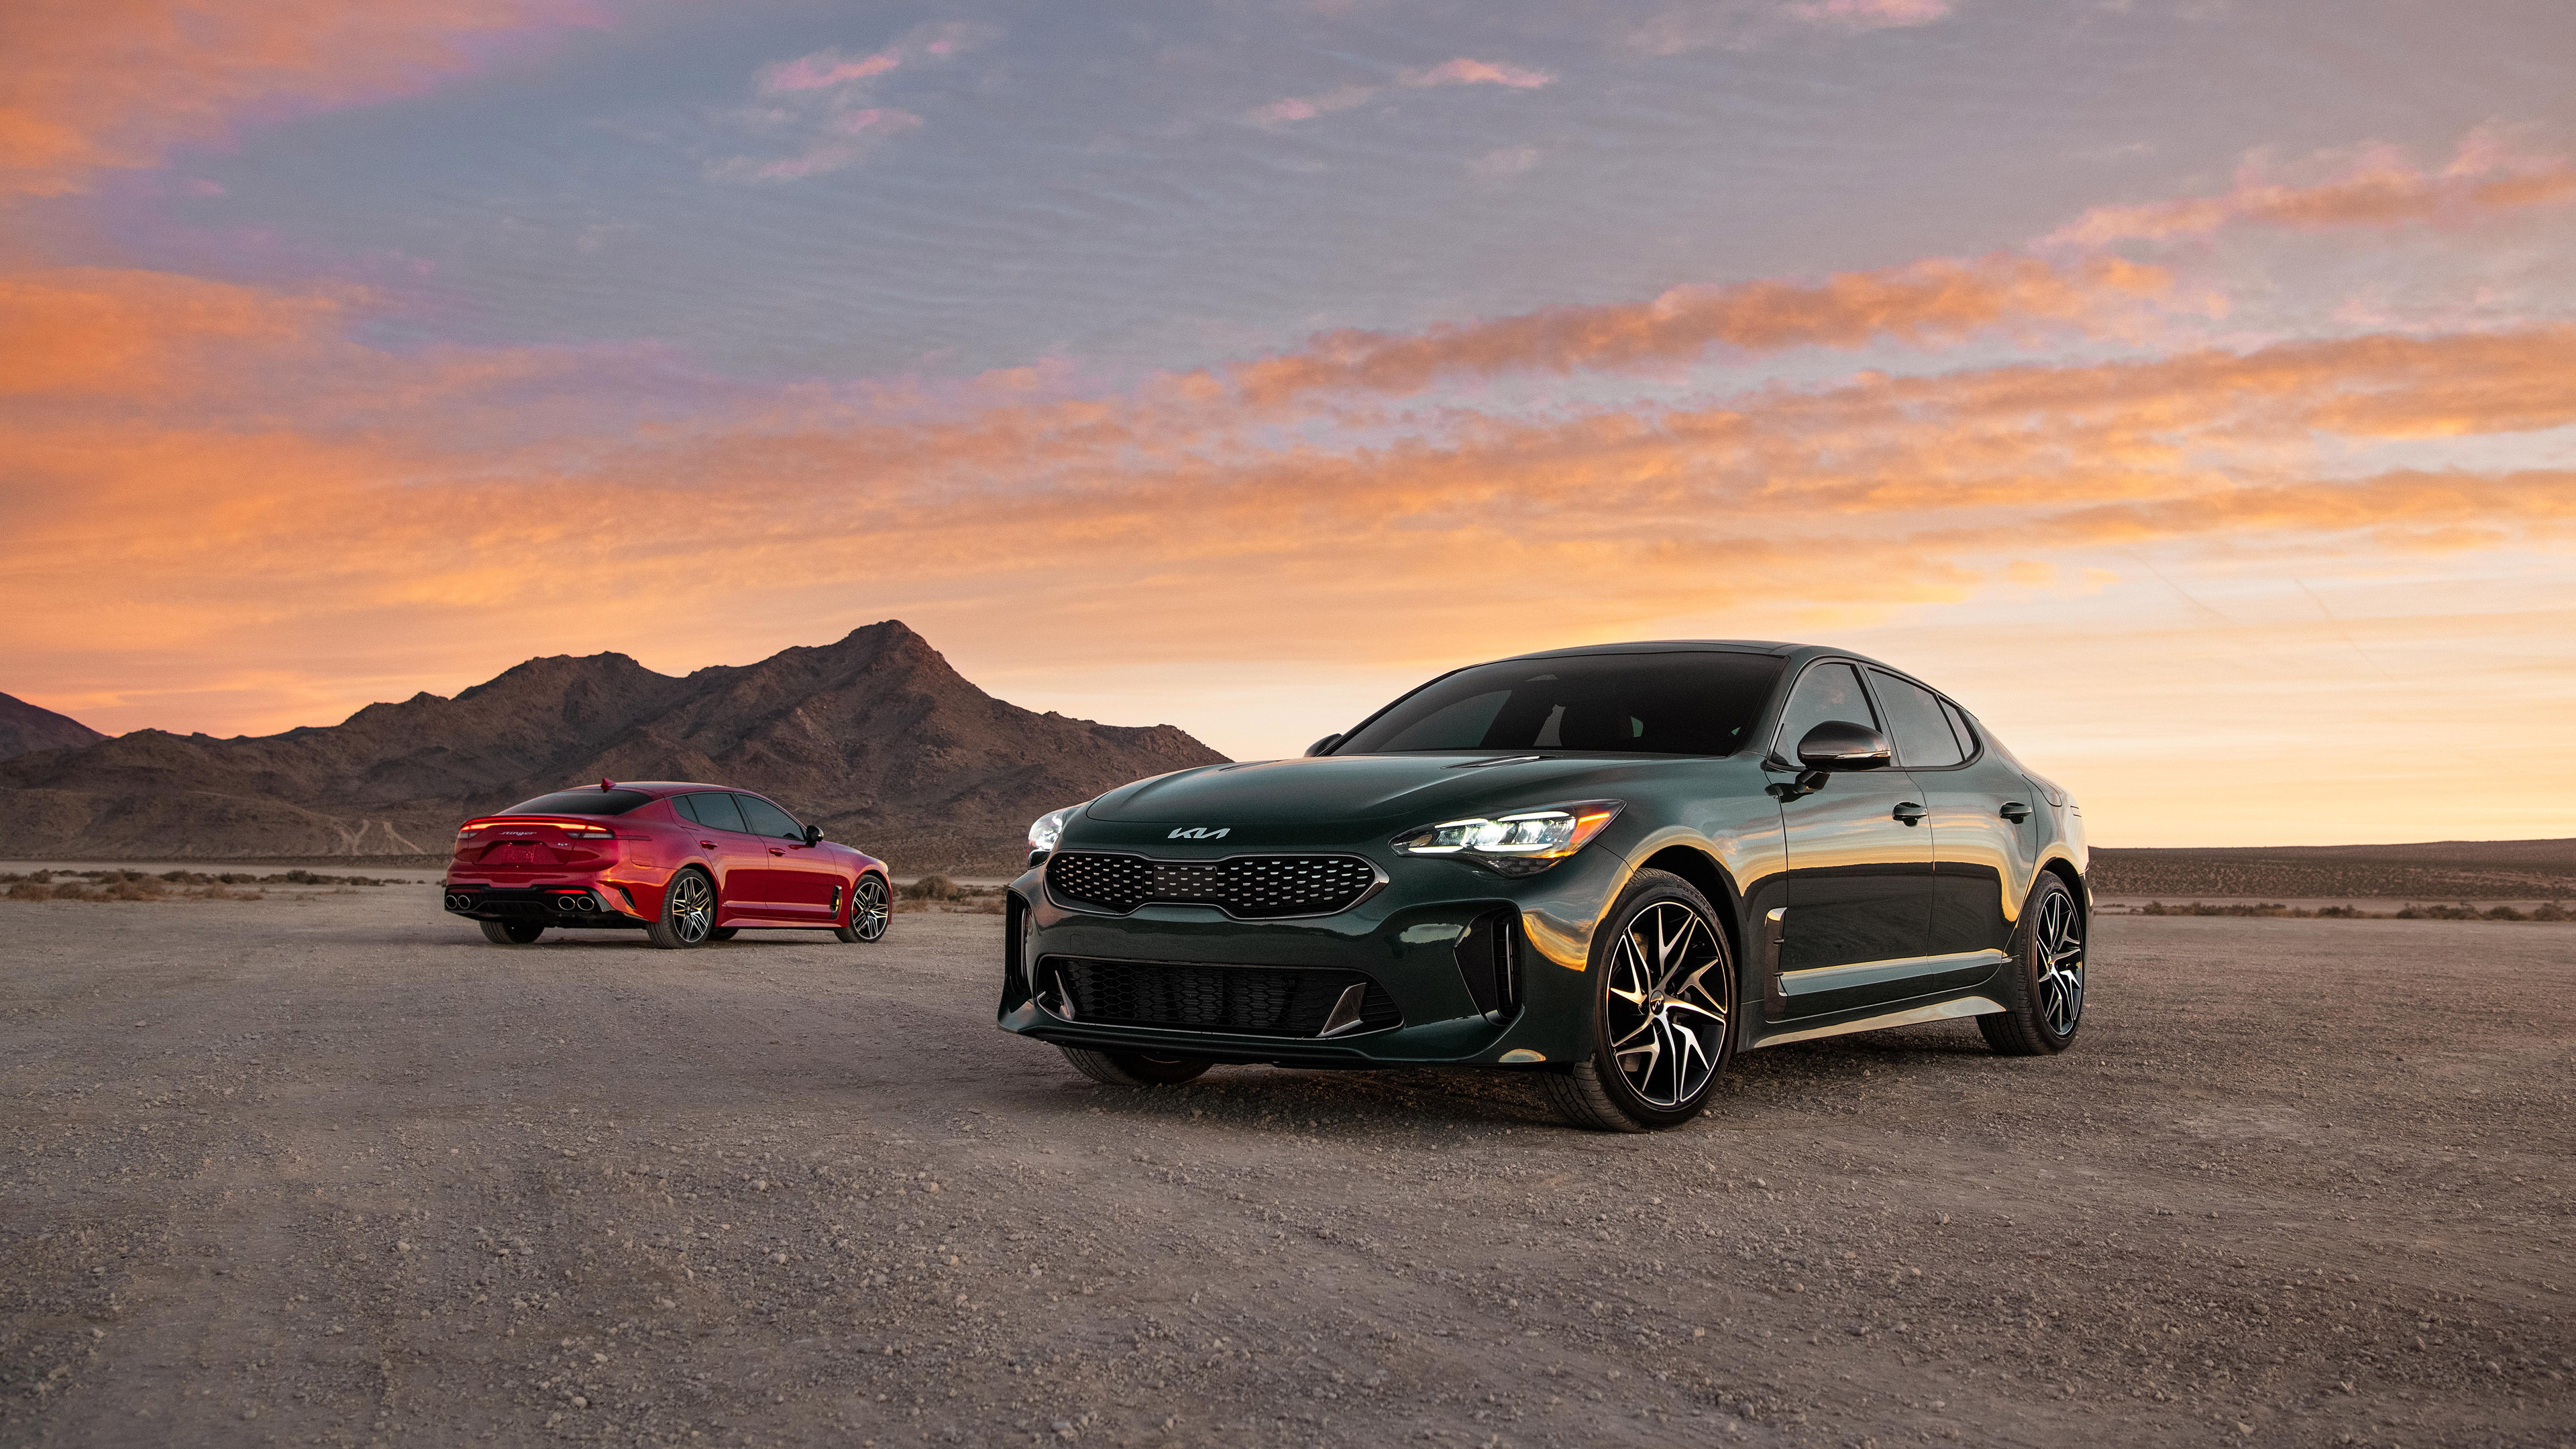 Kia Stinger, Sporty and dynamic, High-definition wallpapers, Unmatched performance, 3840x2160 4K Desktop